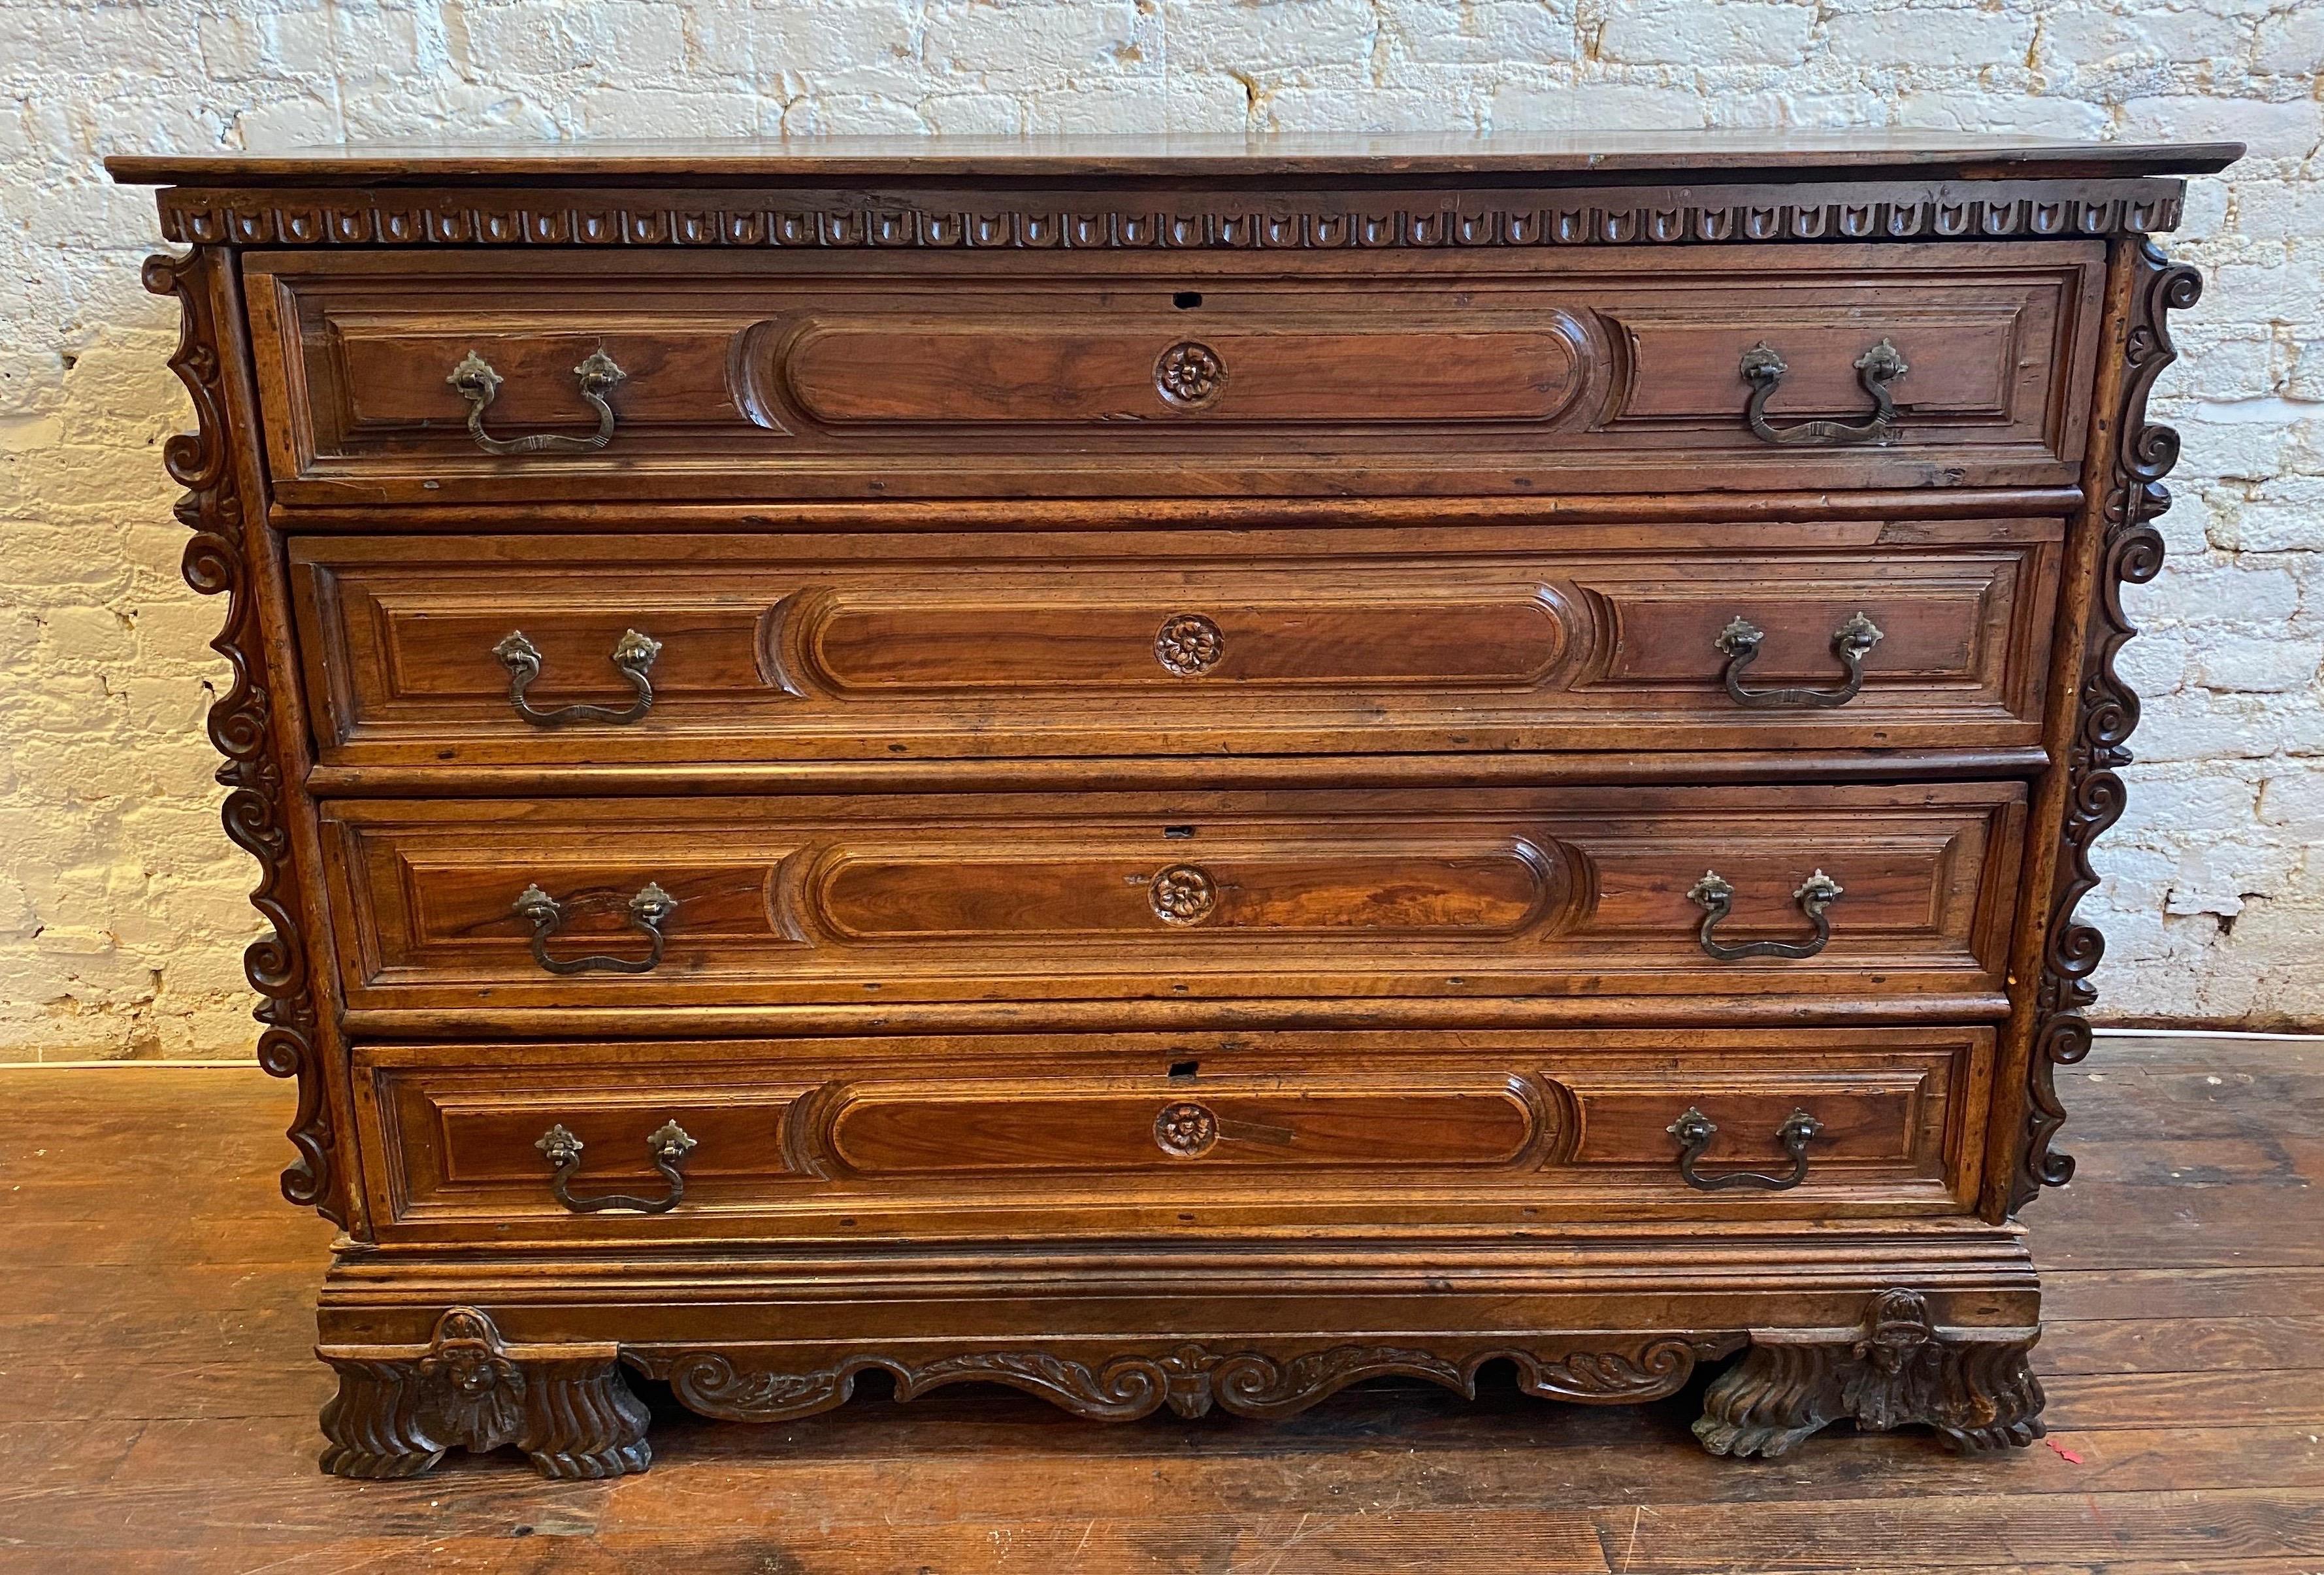 Impressive early Italian walnut 4-drawer commode from the 17th-early 18th century. Standing almost 42